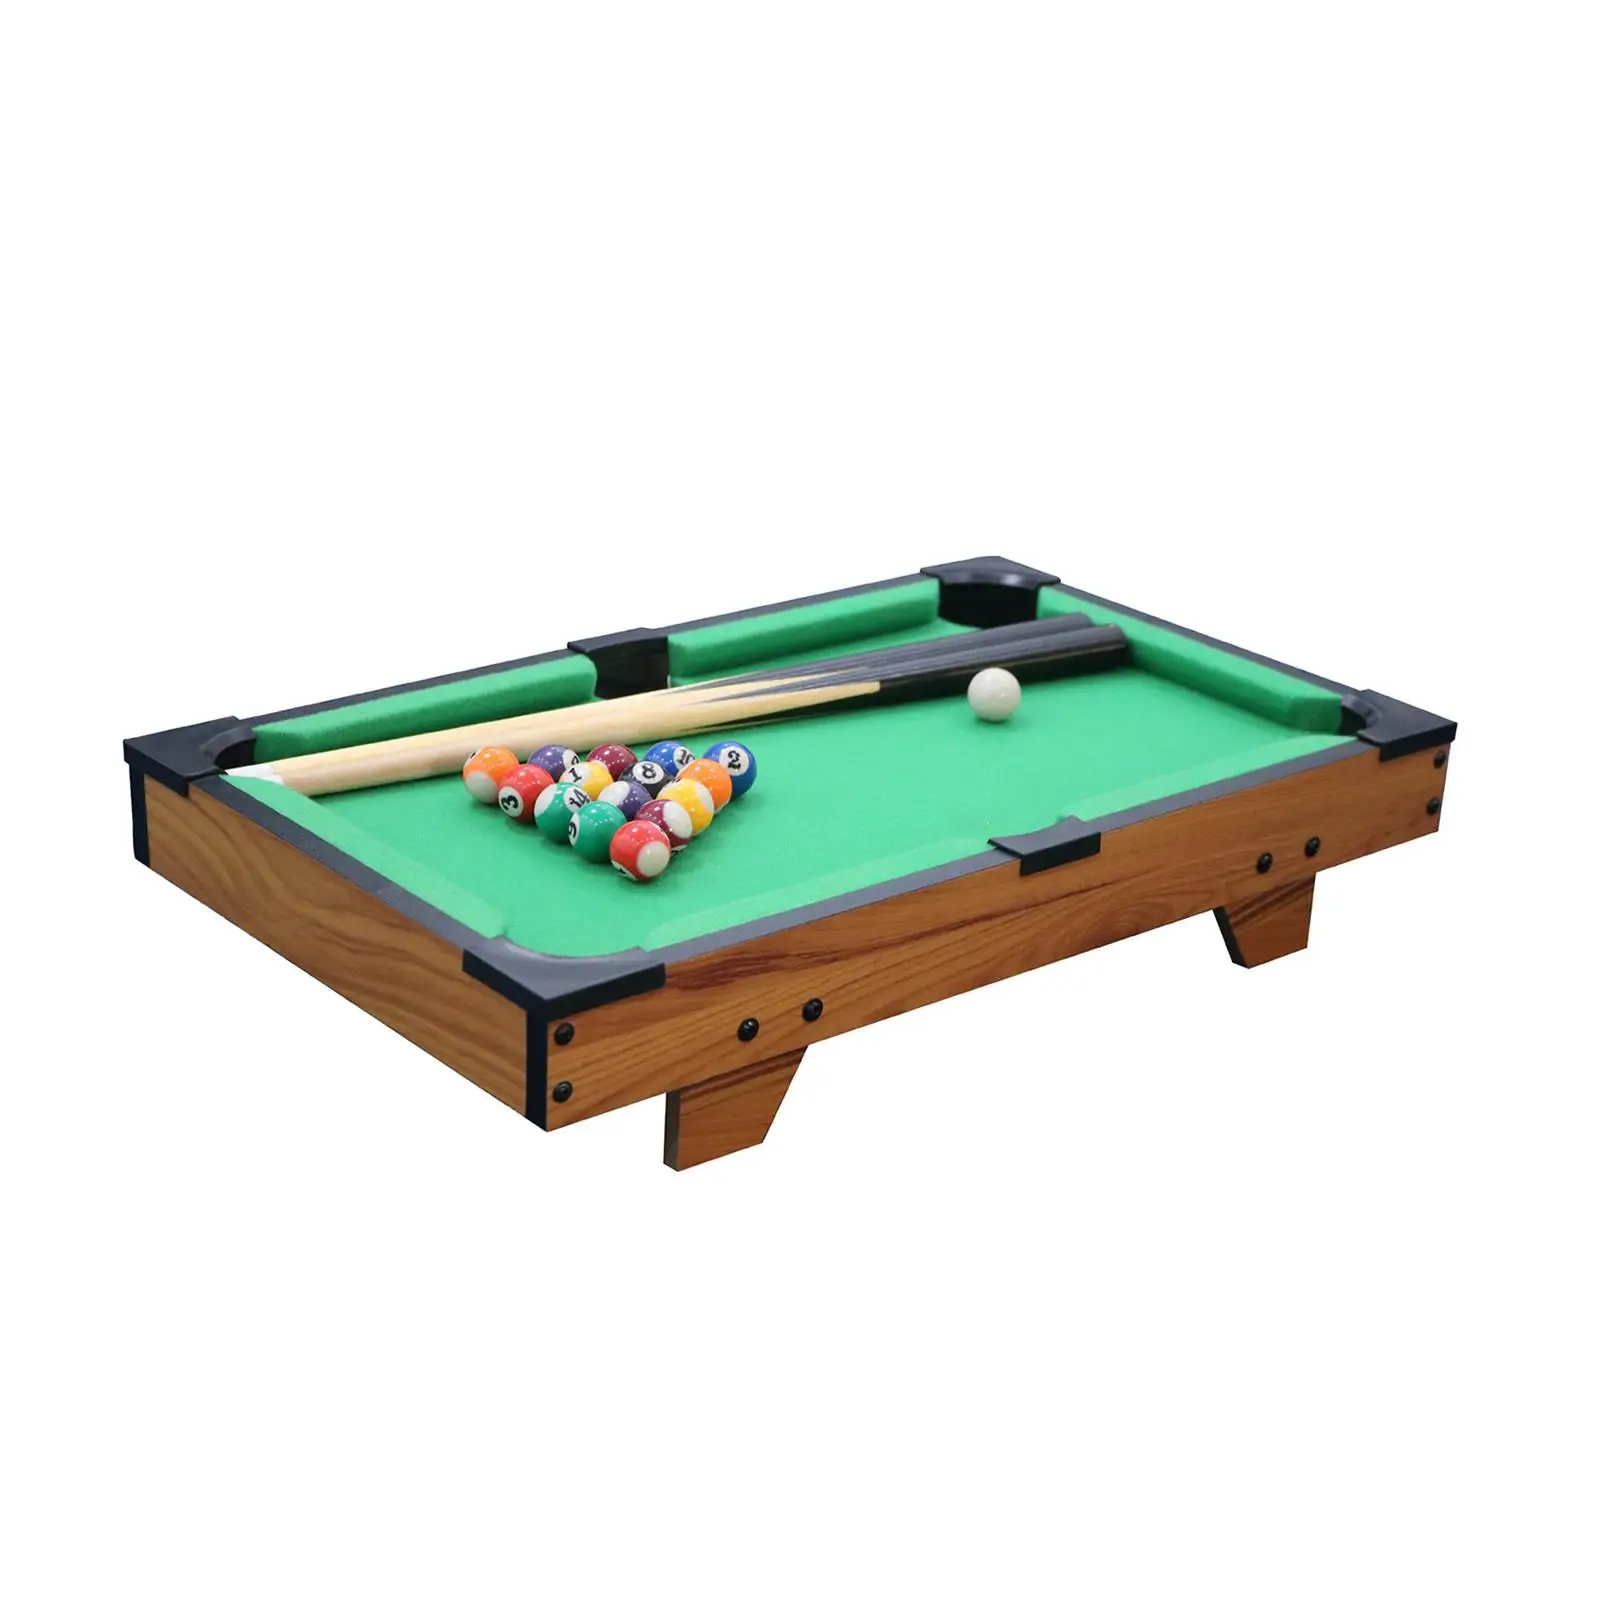 Portable Mini Table pool, Colorful with 2 Sticks Miniature Game Set Snooker for Entertainment Dorm Desk Kids Office